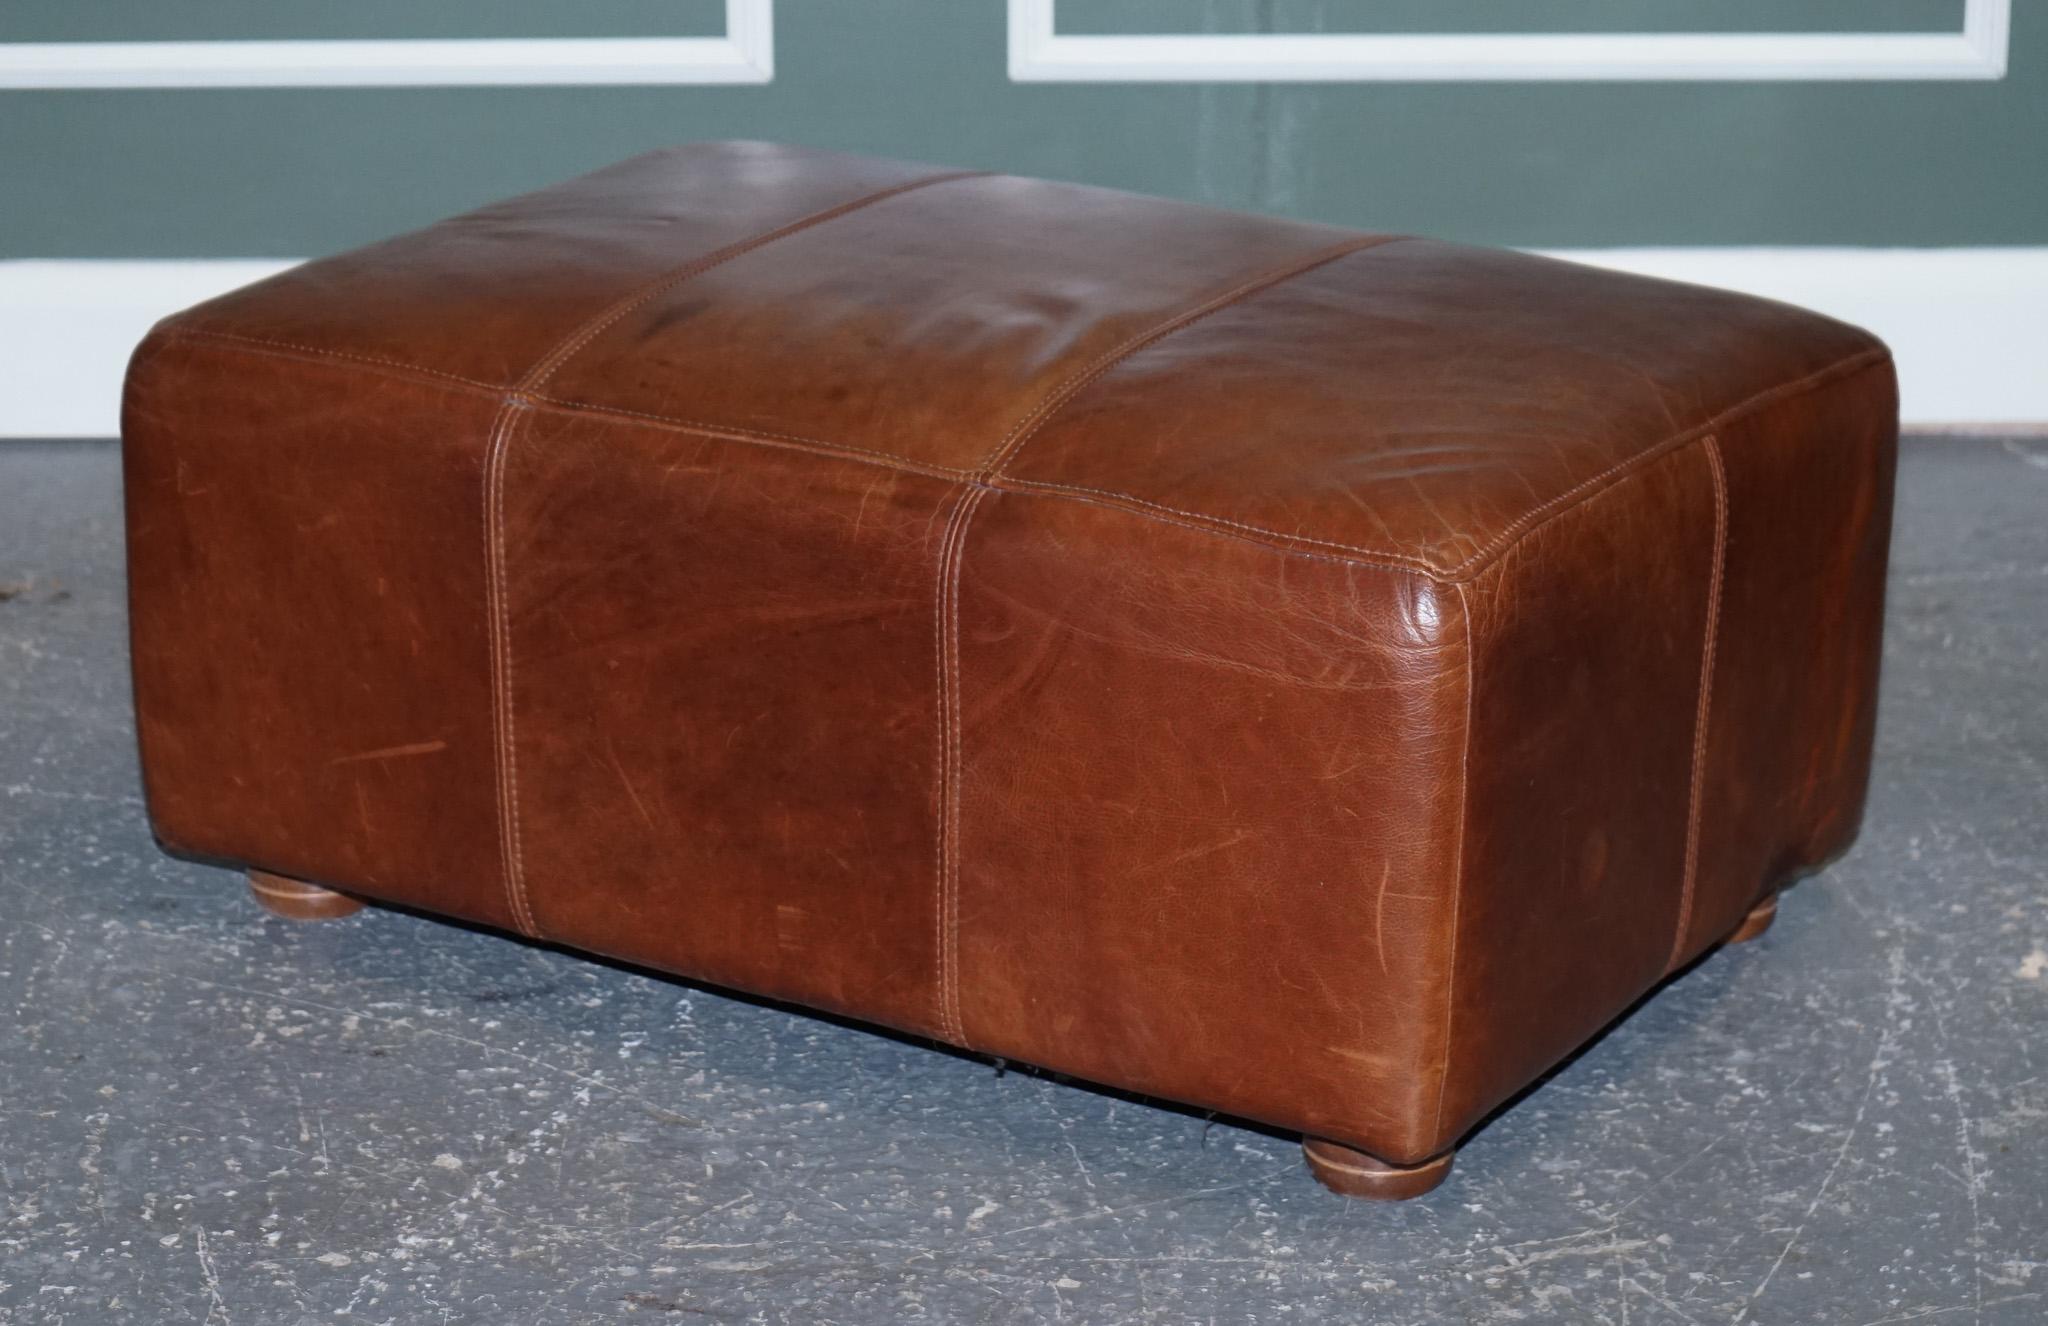 British Large Vintage Brown Leather Footstool Ottoman Made by Halo